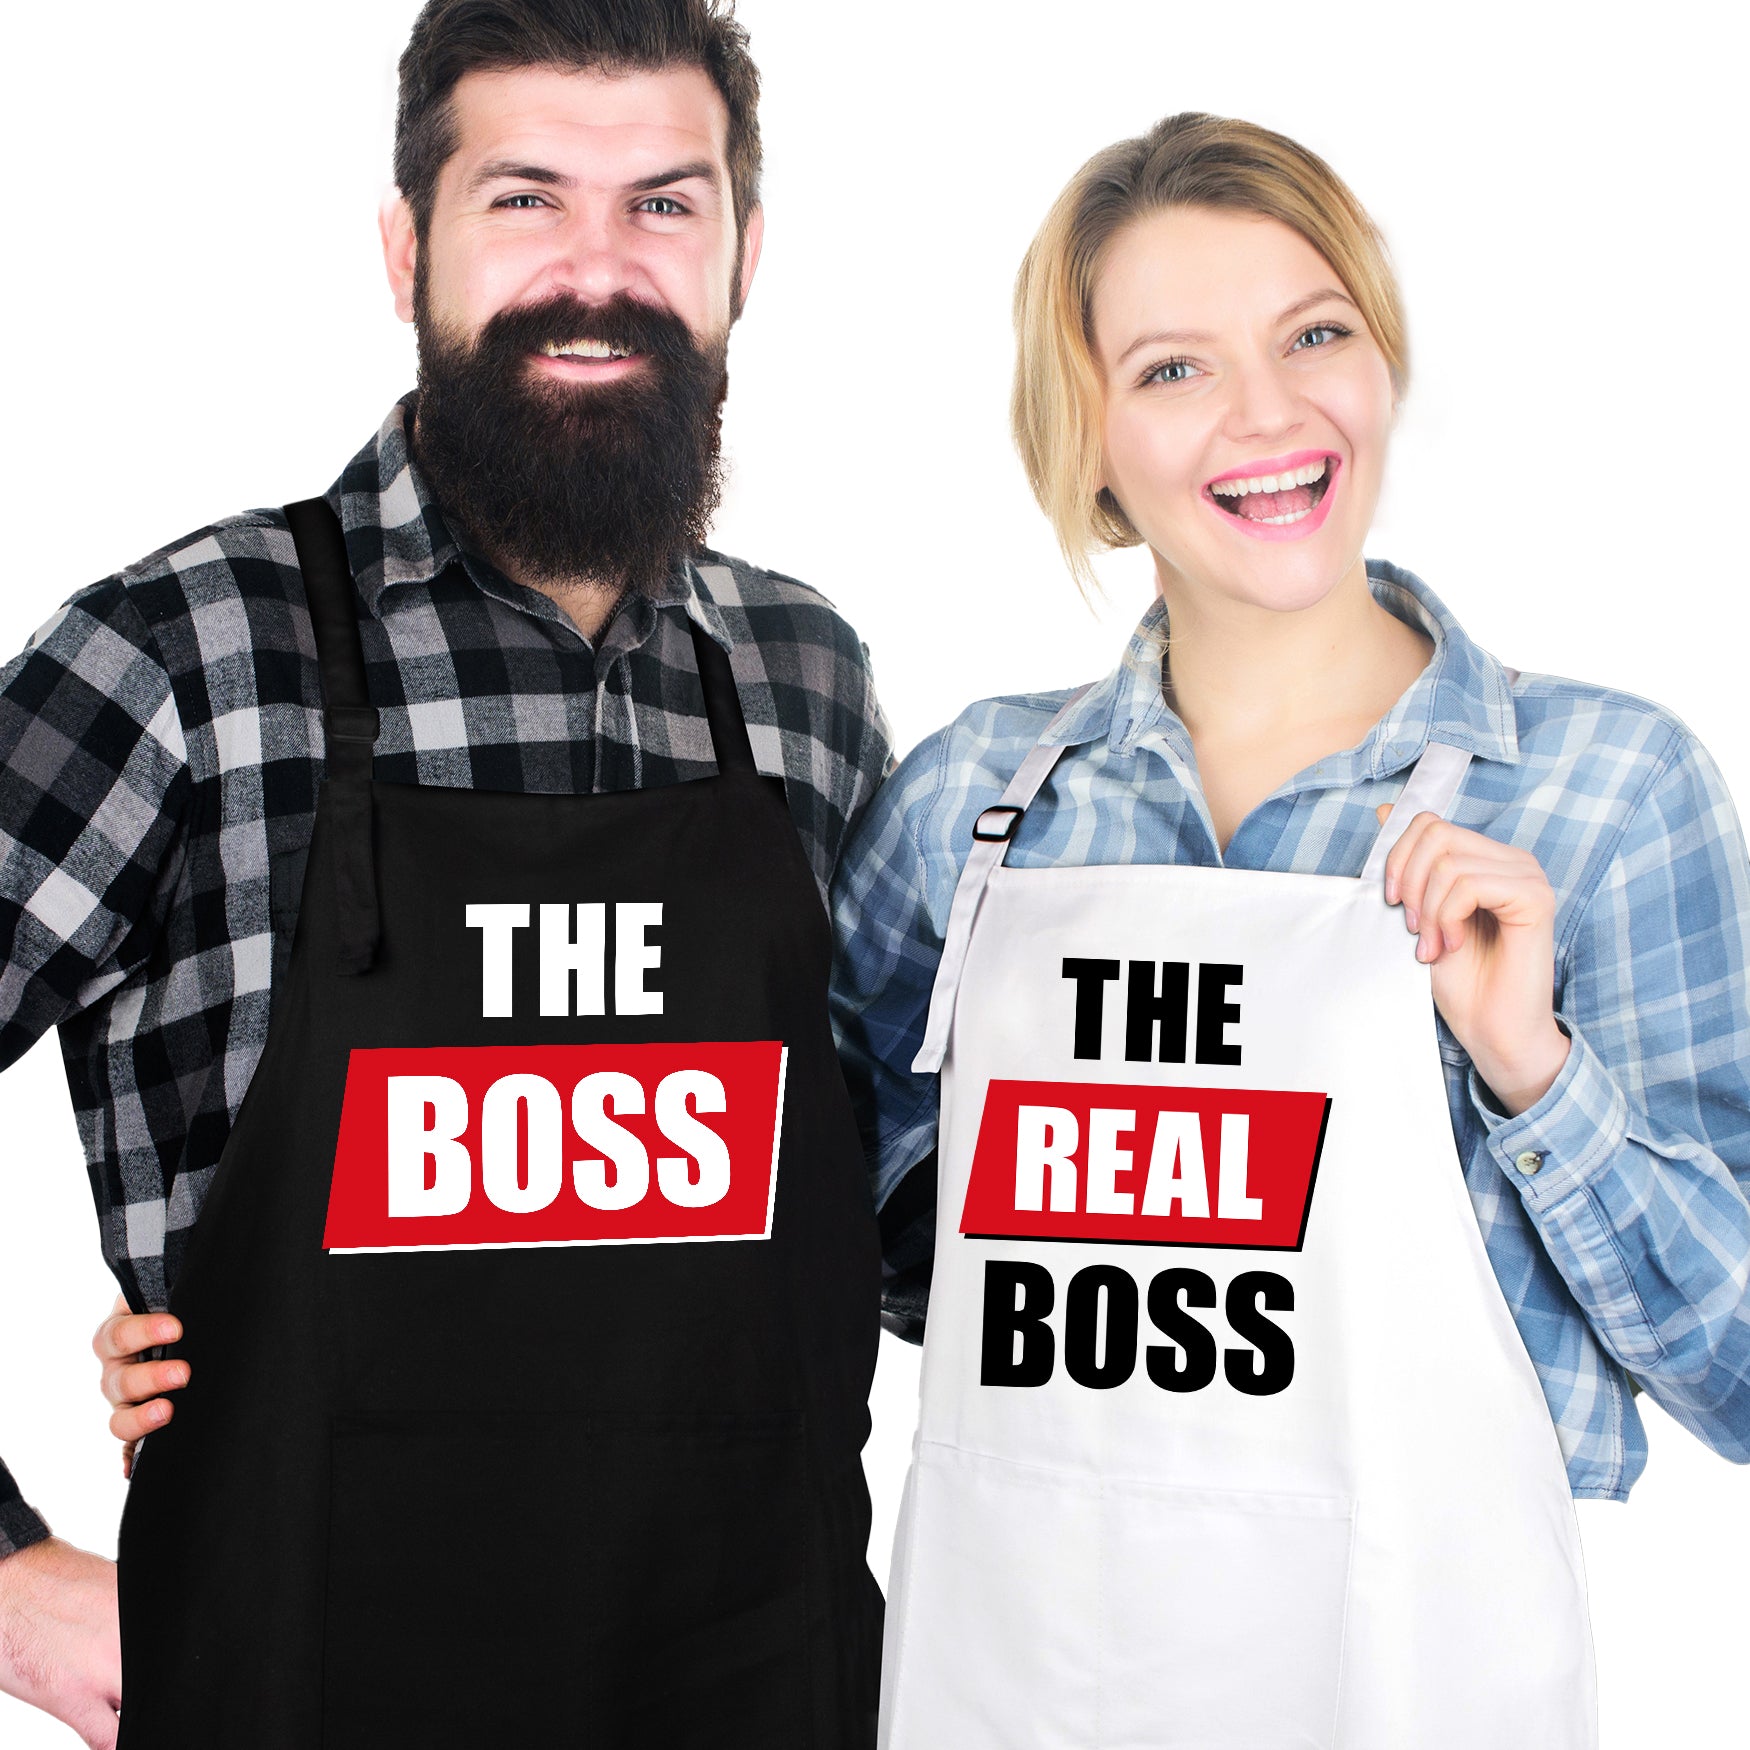 The Boss & The Real Boss Aprons - His and Hers Couples Apron Set